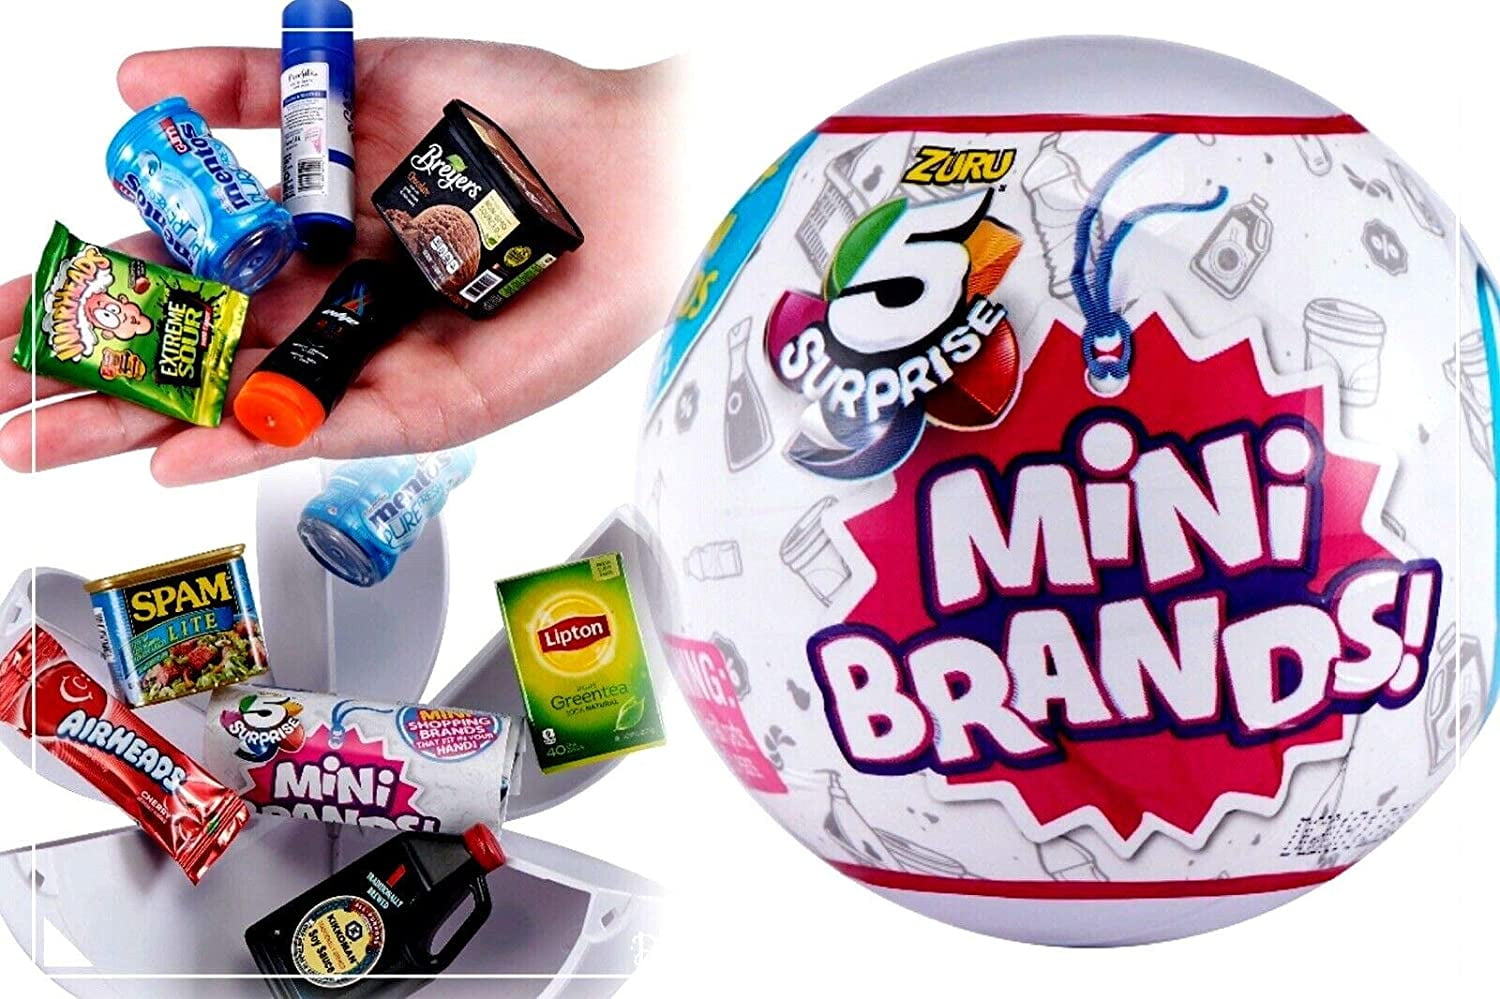 5 Surprise Mini Brands Mystery Capsule Real Miniature Brands Collectible  Toy (2 Pack) by ZURU 